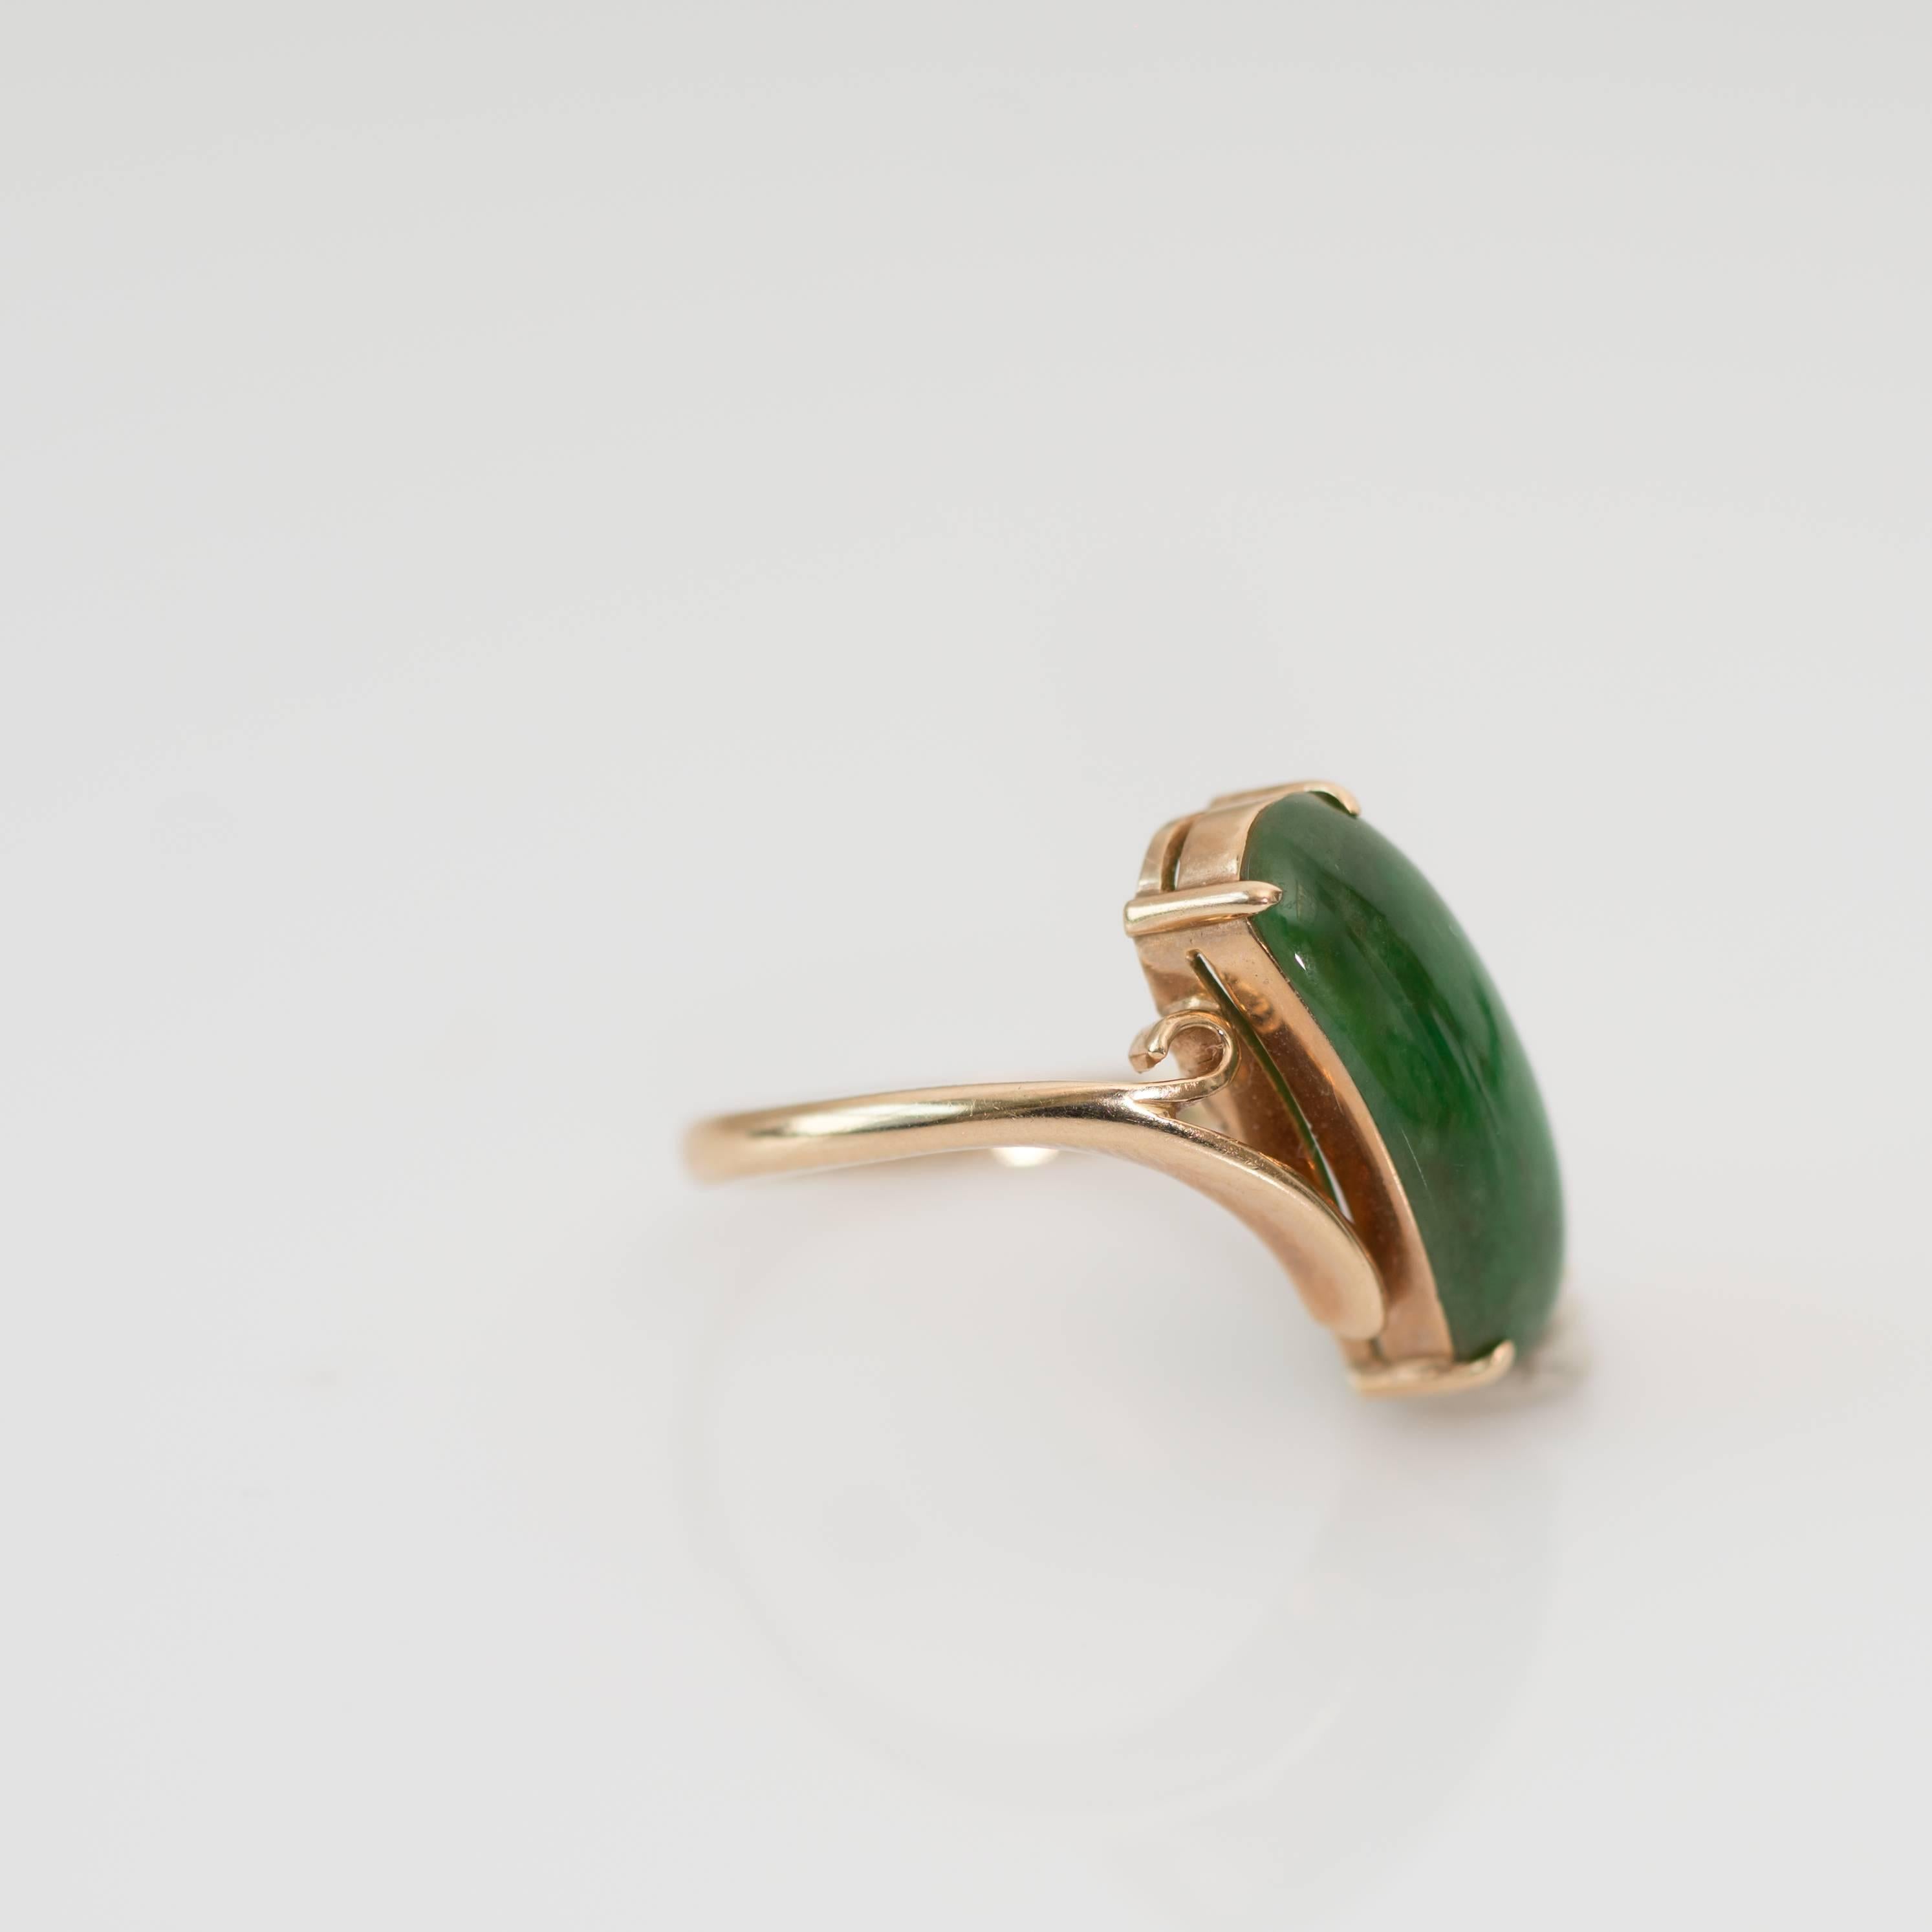 This elegant elongated Jade Cabochon ring came to us from a Hong Kong estate. It sits diagonally on the finger creating a slimming and lengthening effect. 

The 14 karat yellow gold perfectly accents the medium to dark green prong set Jade center